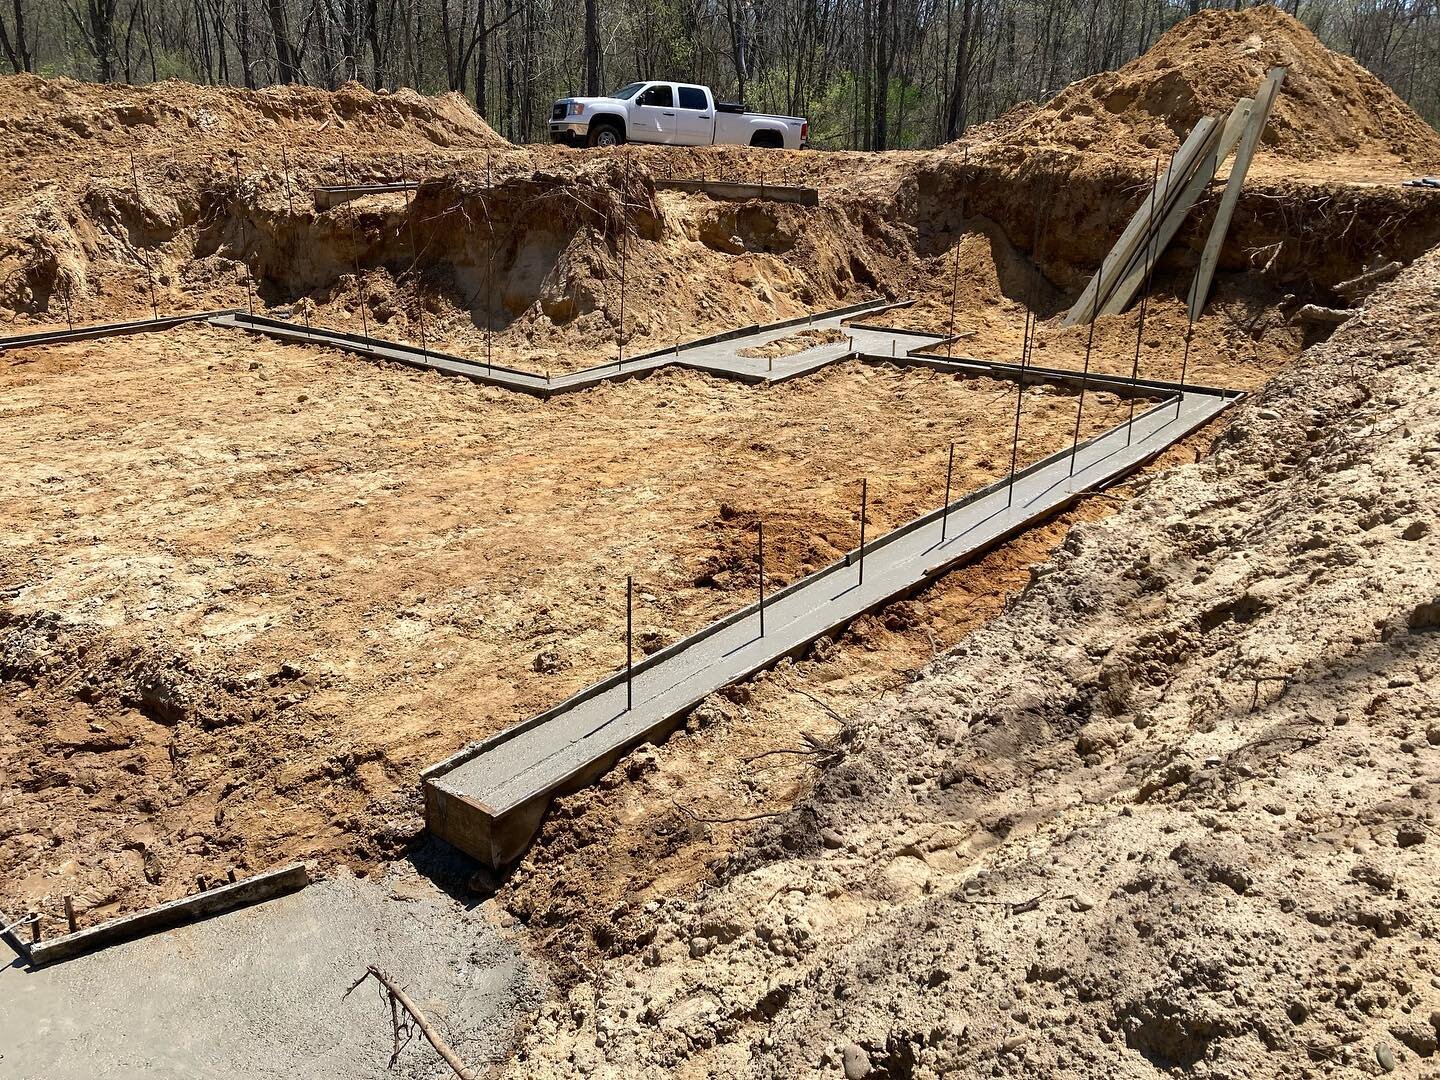 So it begins! This two bed two bath with a walkout basement is well under way! Footings are in the ground and ready to pour the basement walls!

#newconstruction #footings #flannelhomes